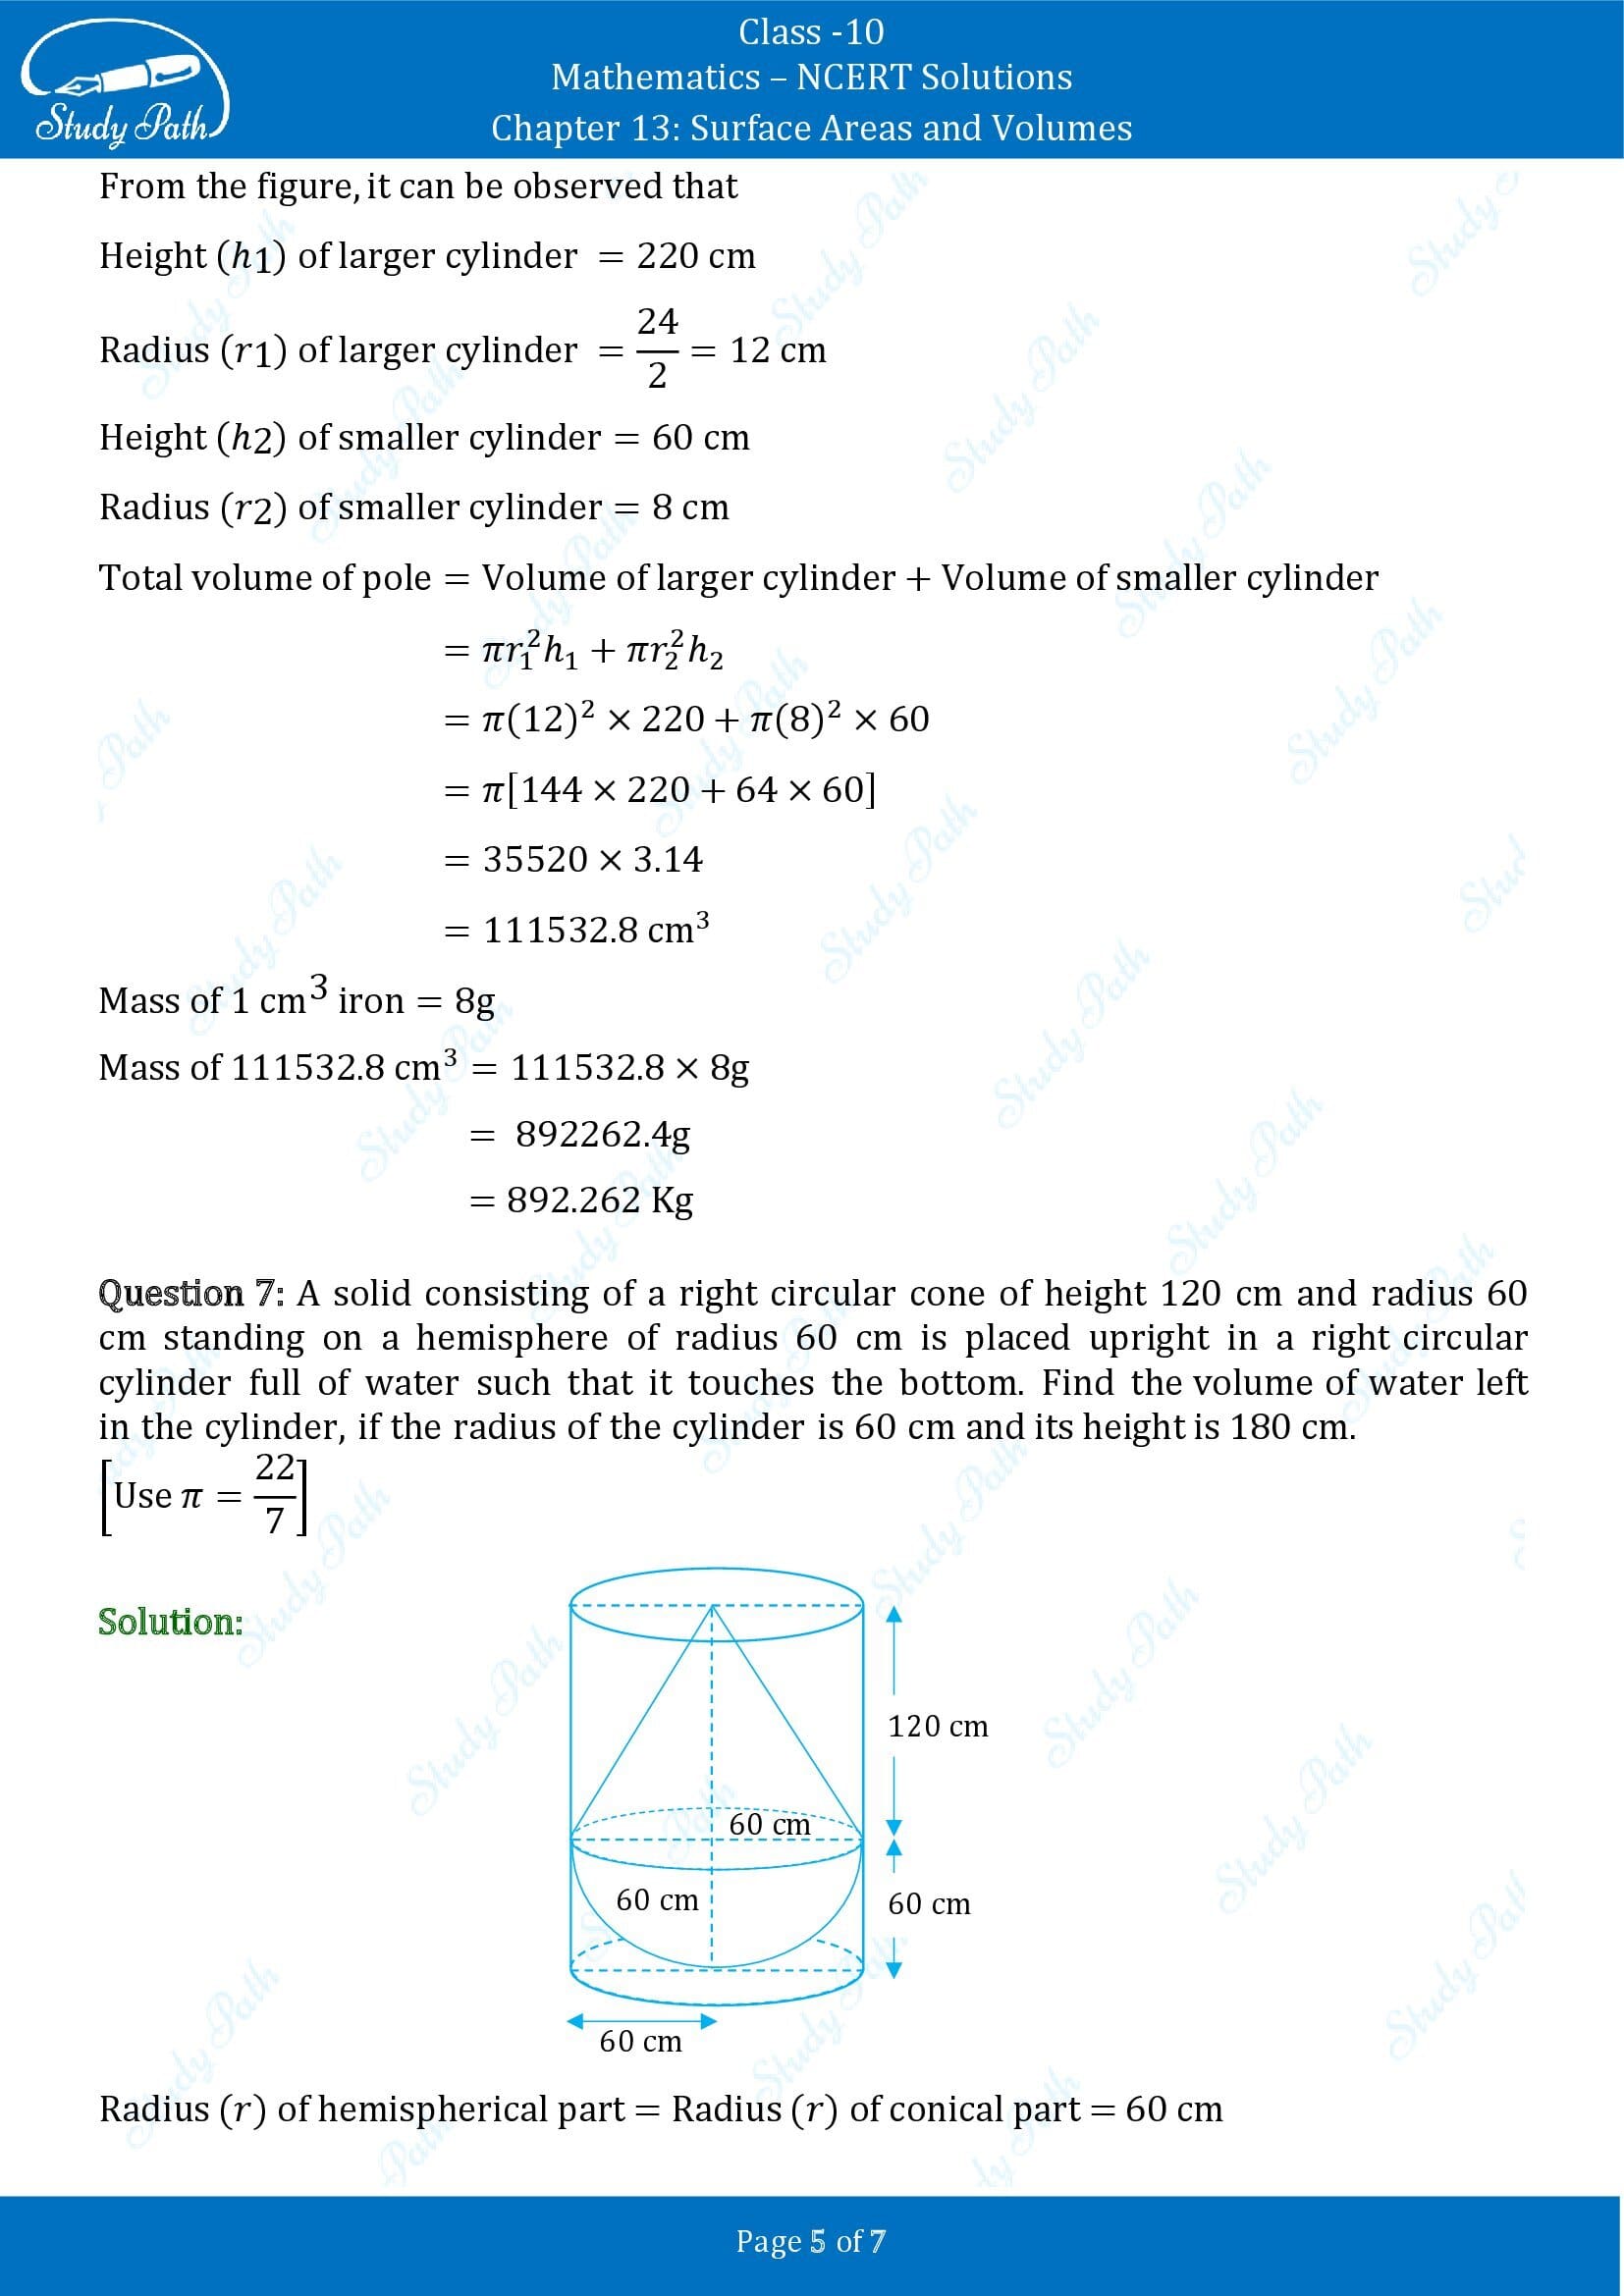 NCERT Solutions for Class 10 Maths Chapter 13 Surface Areas and Volumes Exercise 13.2 00005